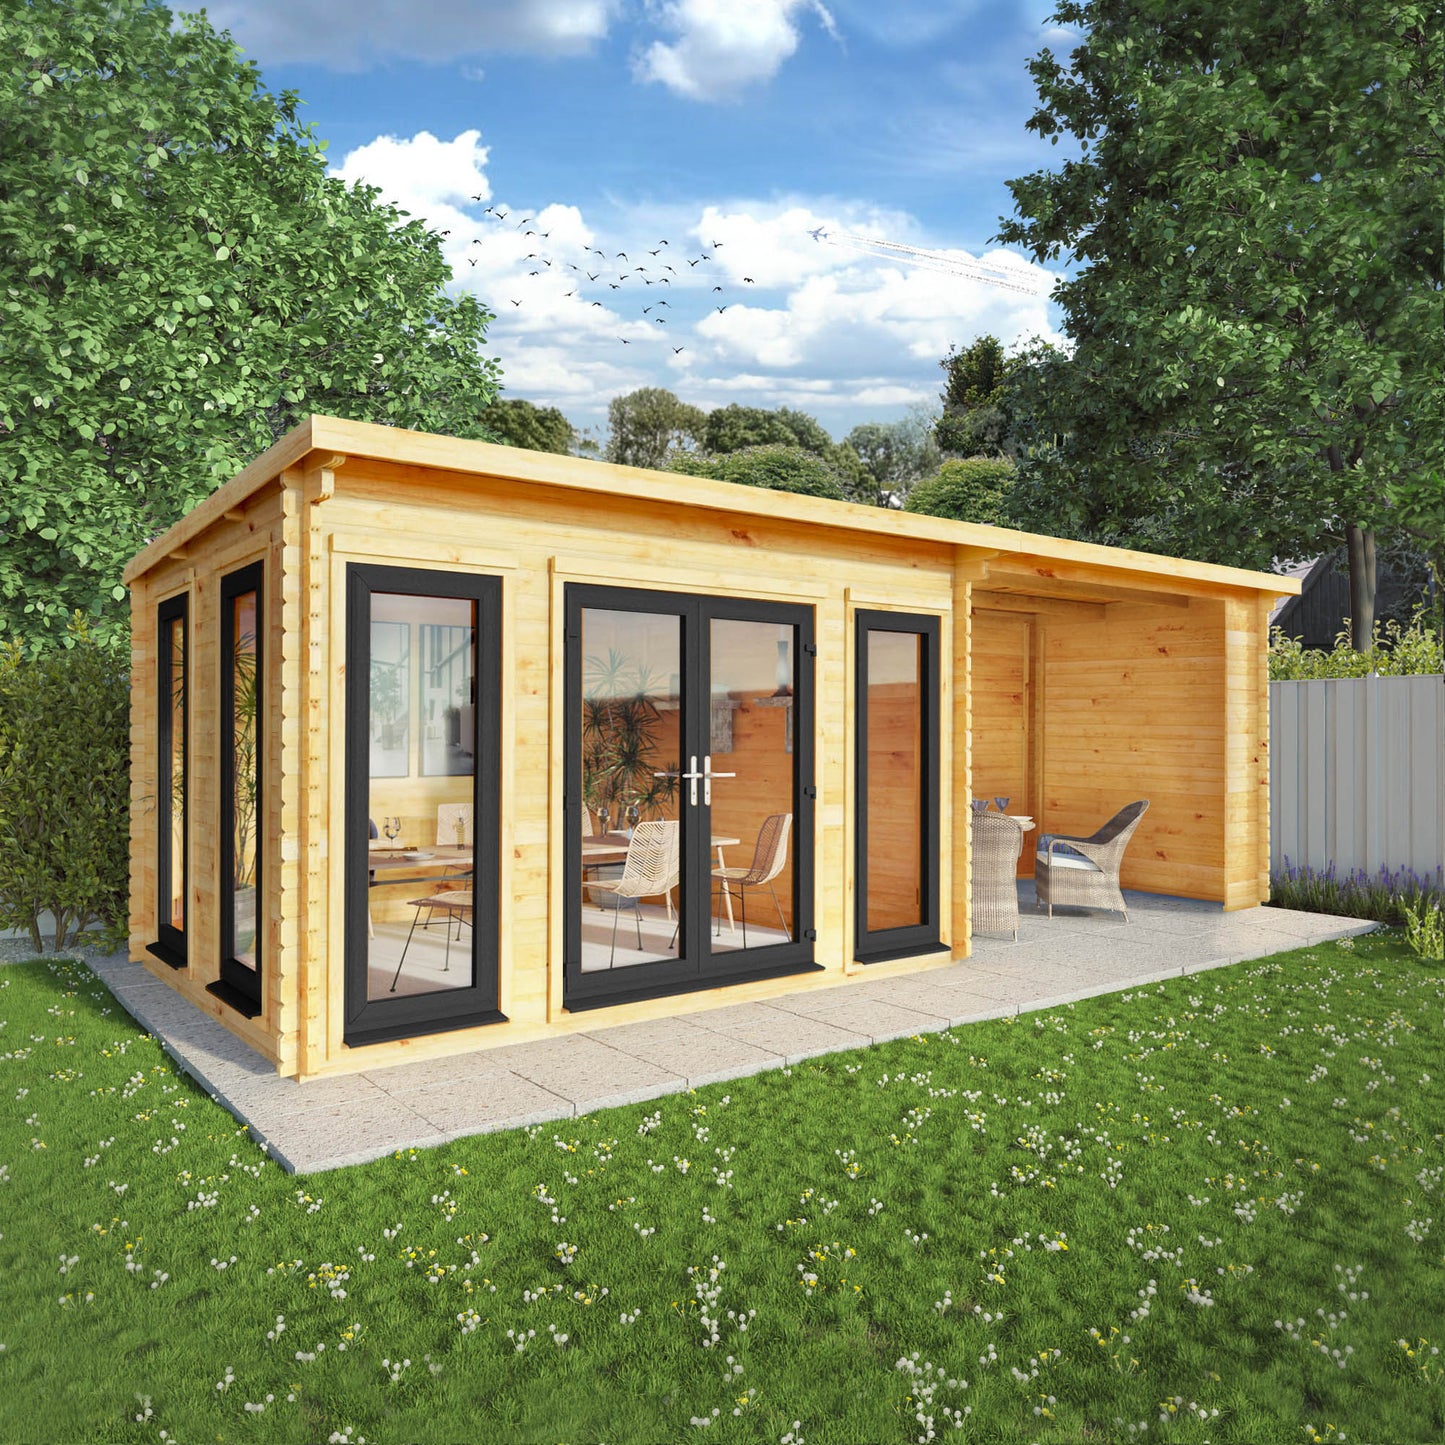 The 7m x 3m Wren Log Cabin with Patio Area and Anthracite UPVC